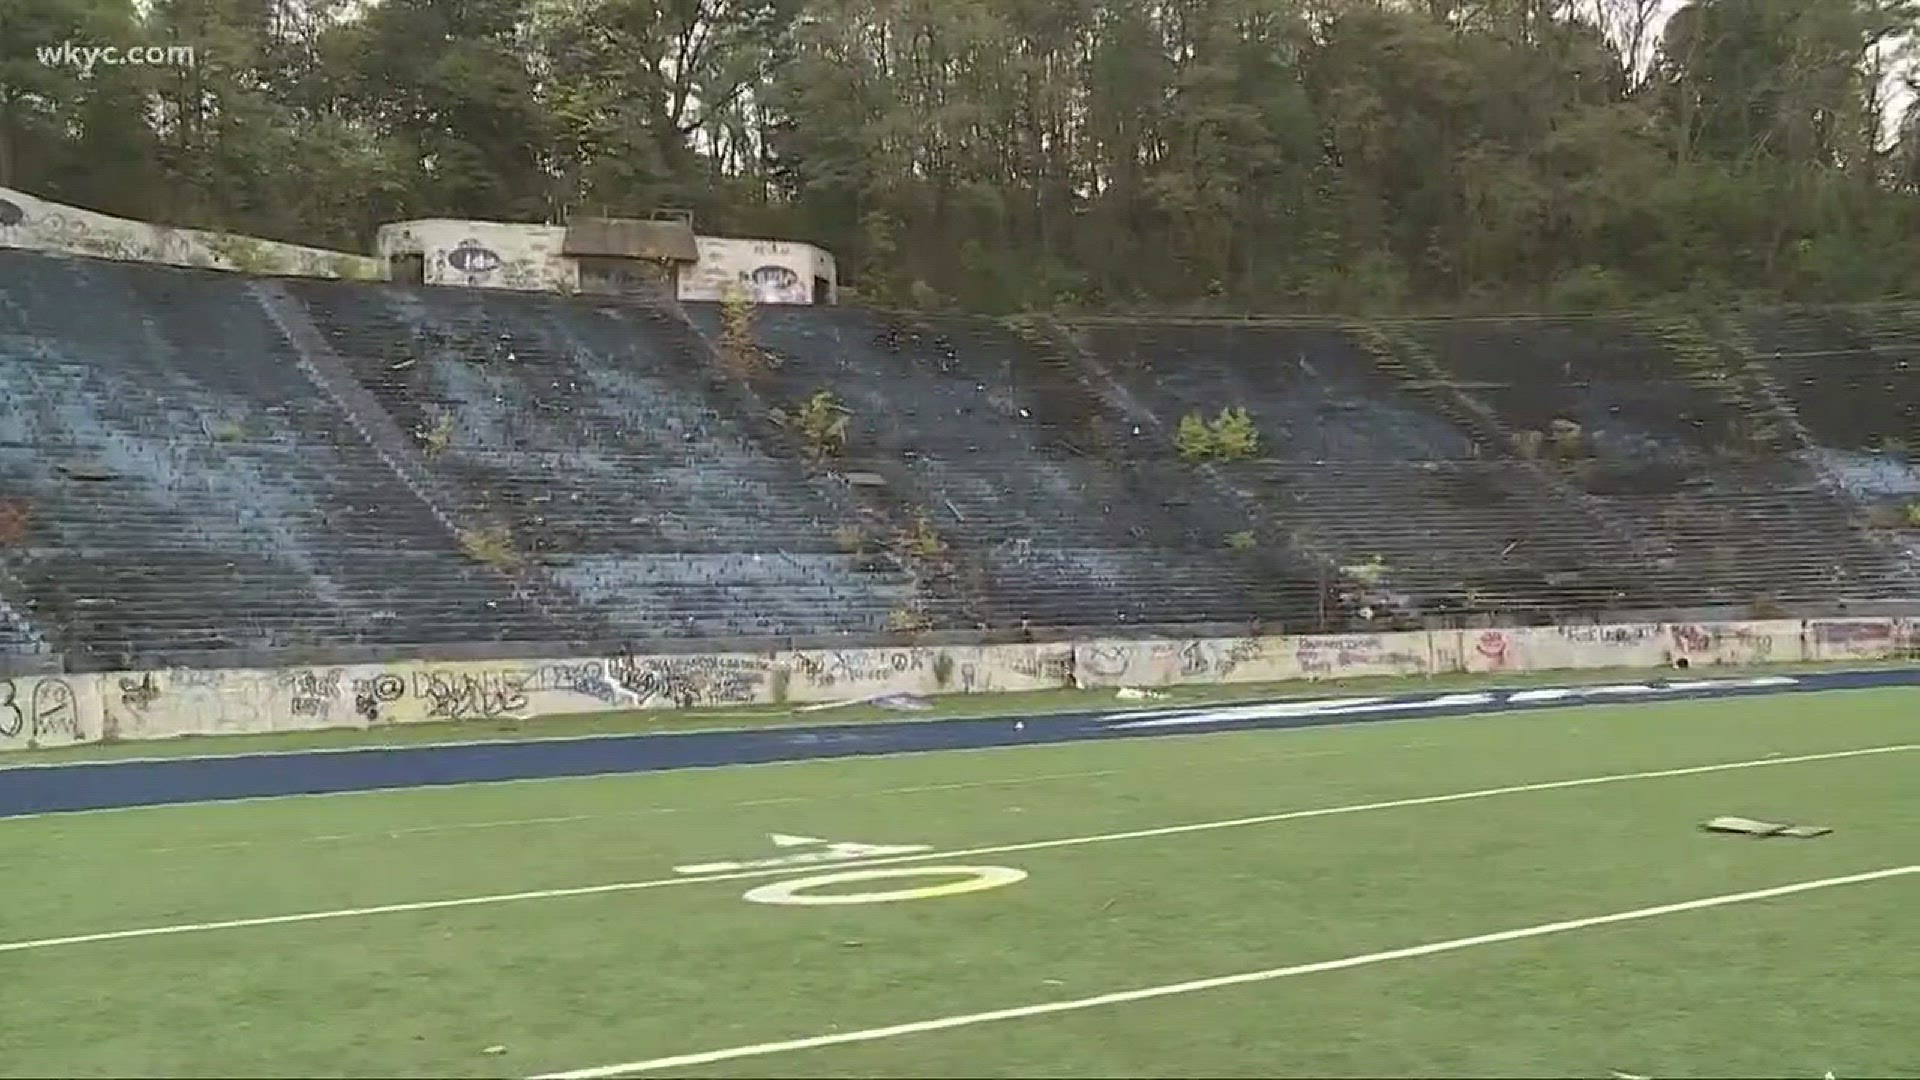 What is to come for Akron's iconic Rubber Bowl?